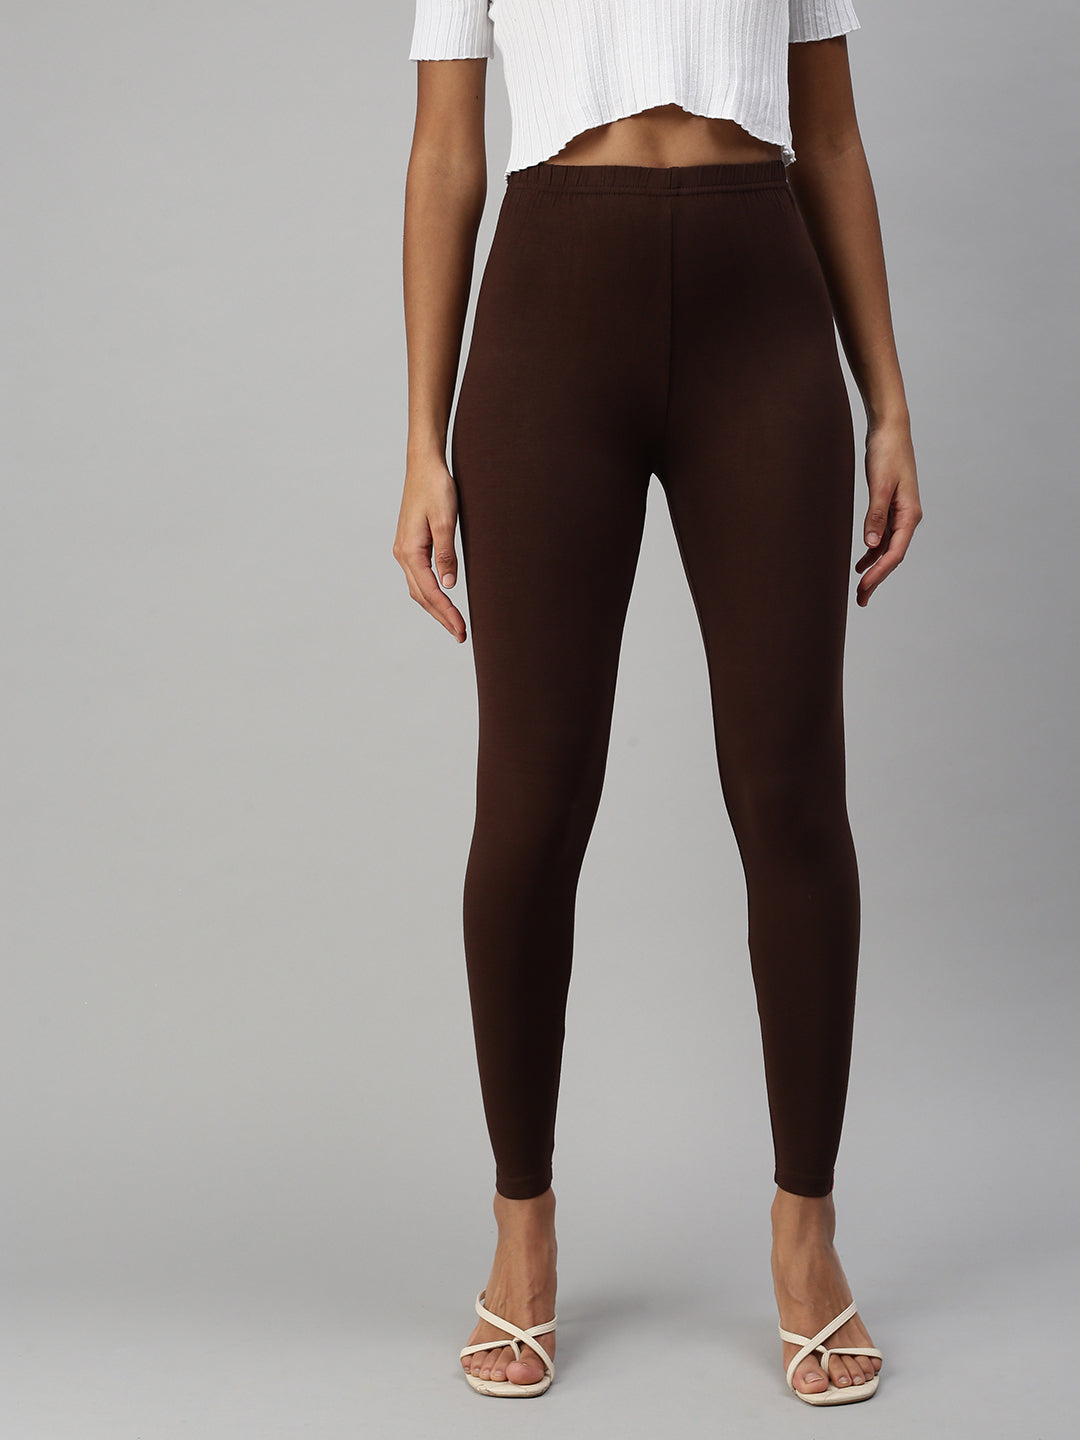 Prisma Leggings Collection | Stylish leggings, Clothes, Online shopping  stores